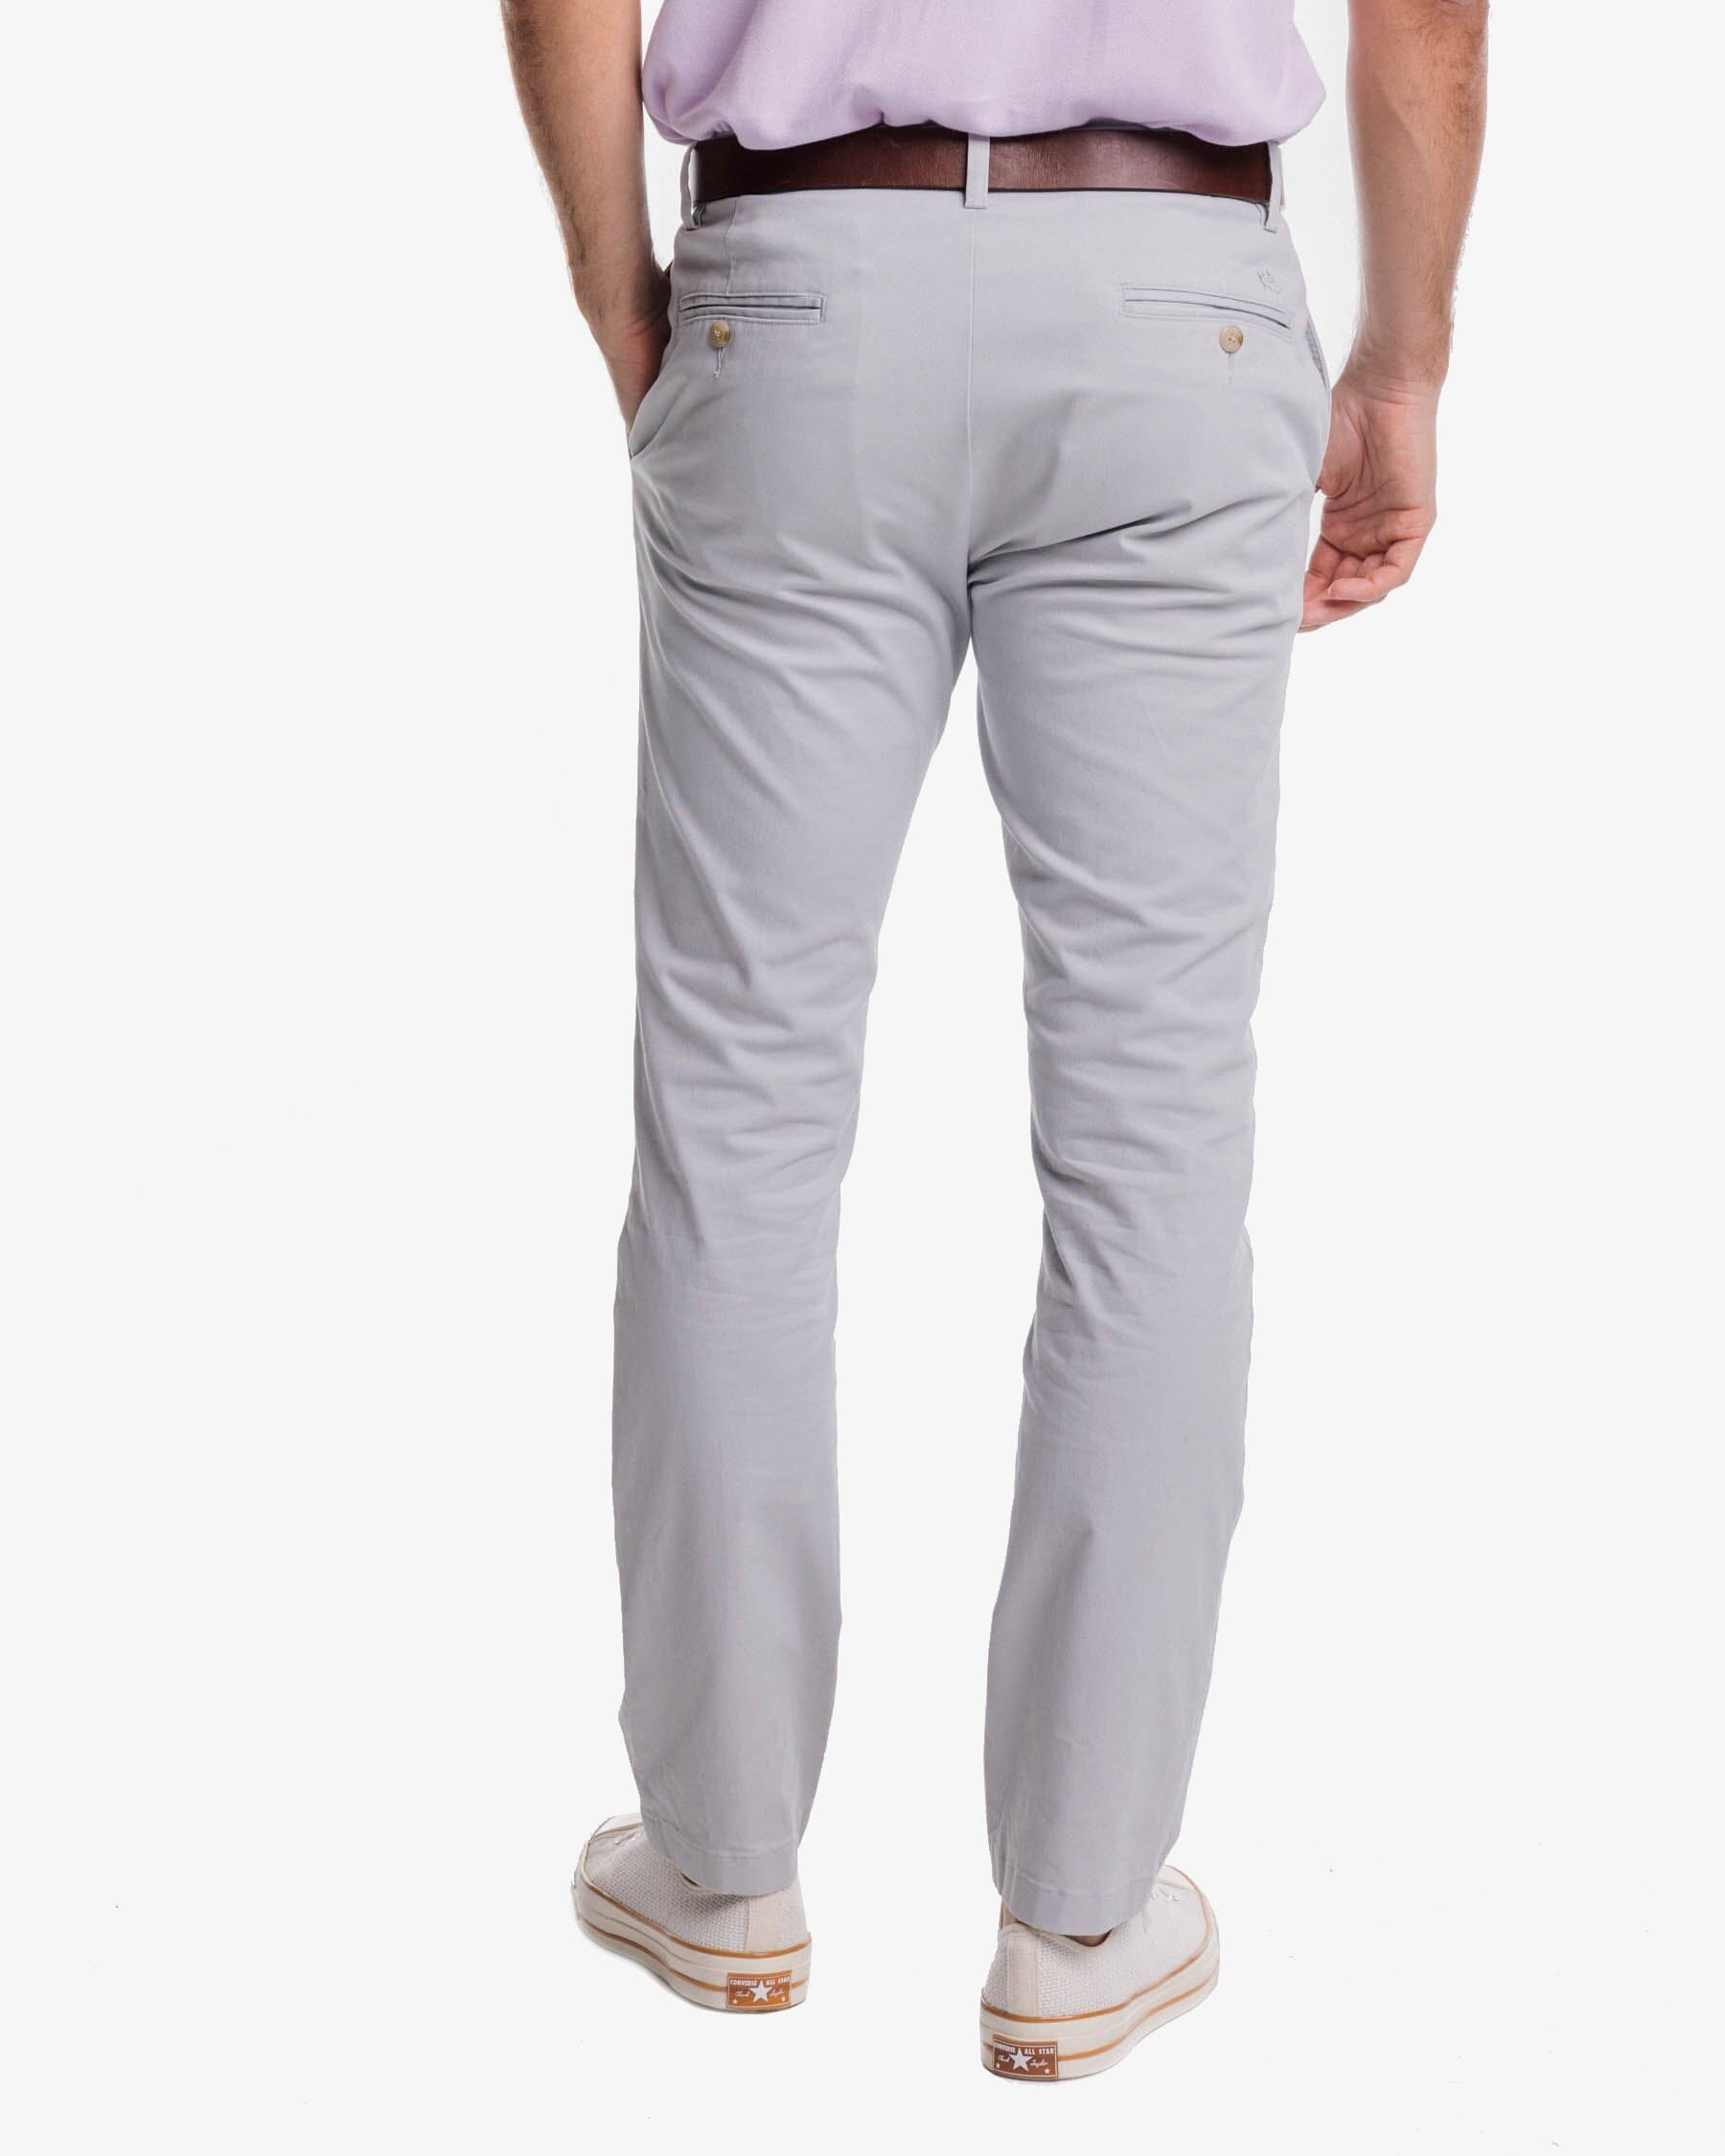 Channel Marker Chino Pant - Seagull Grey